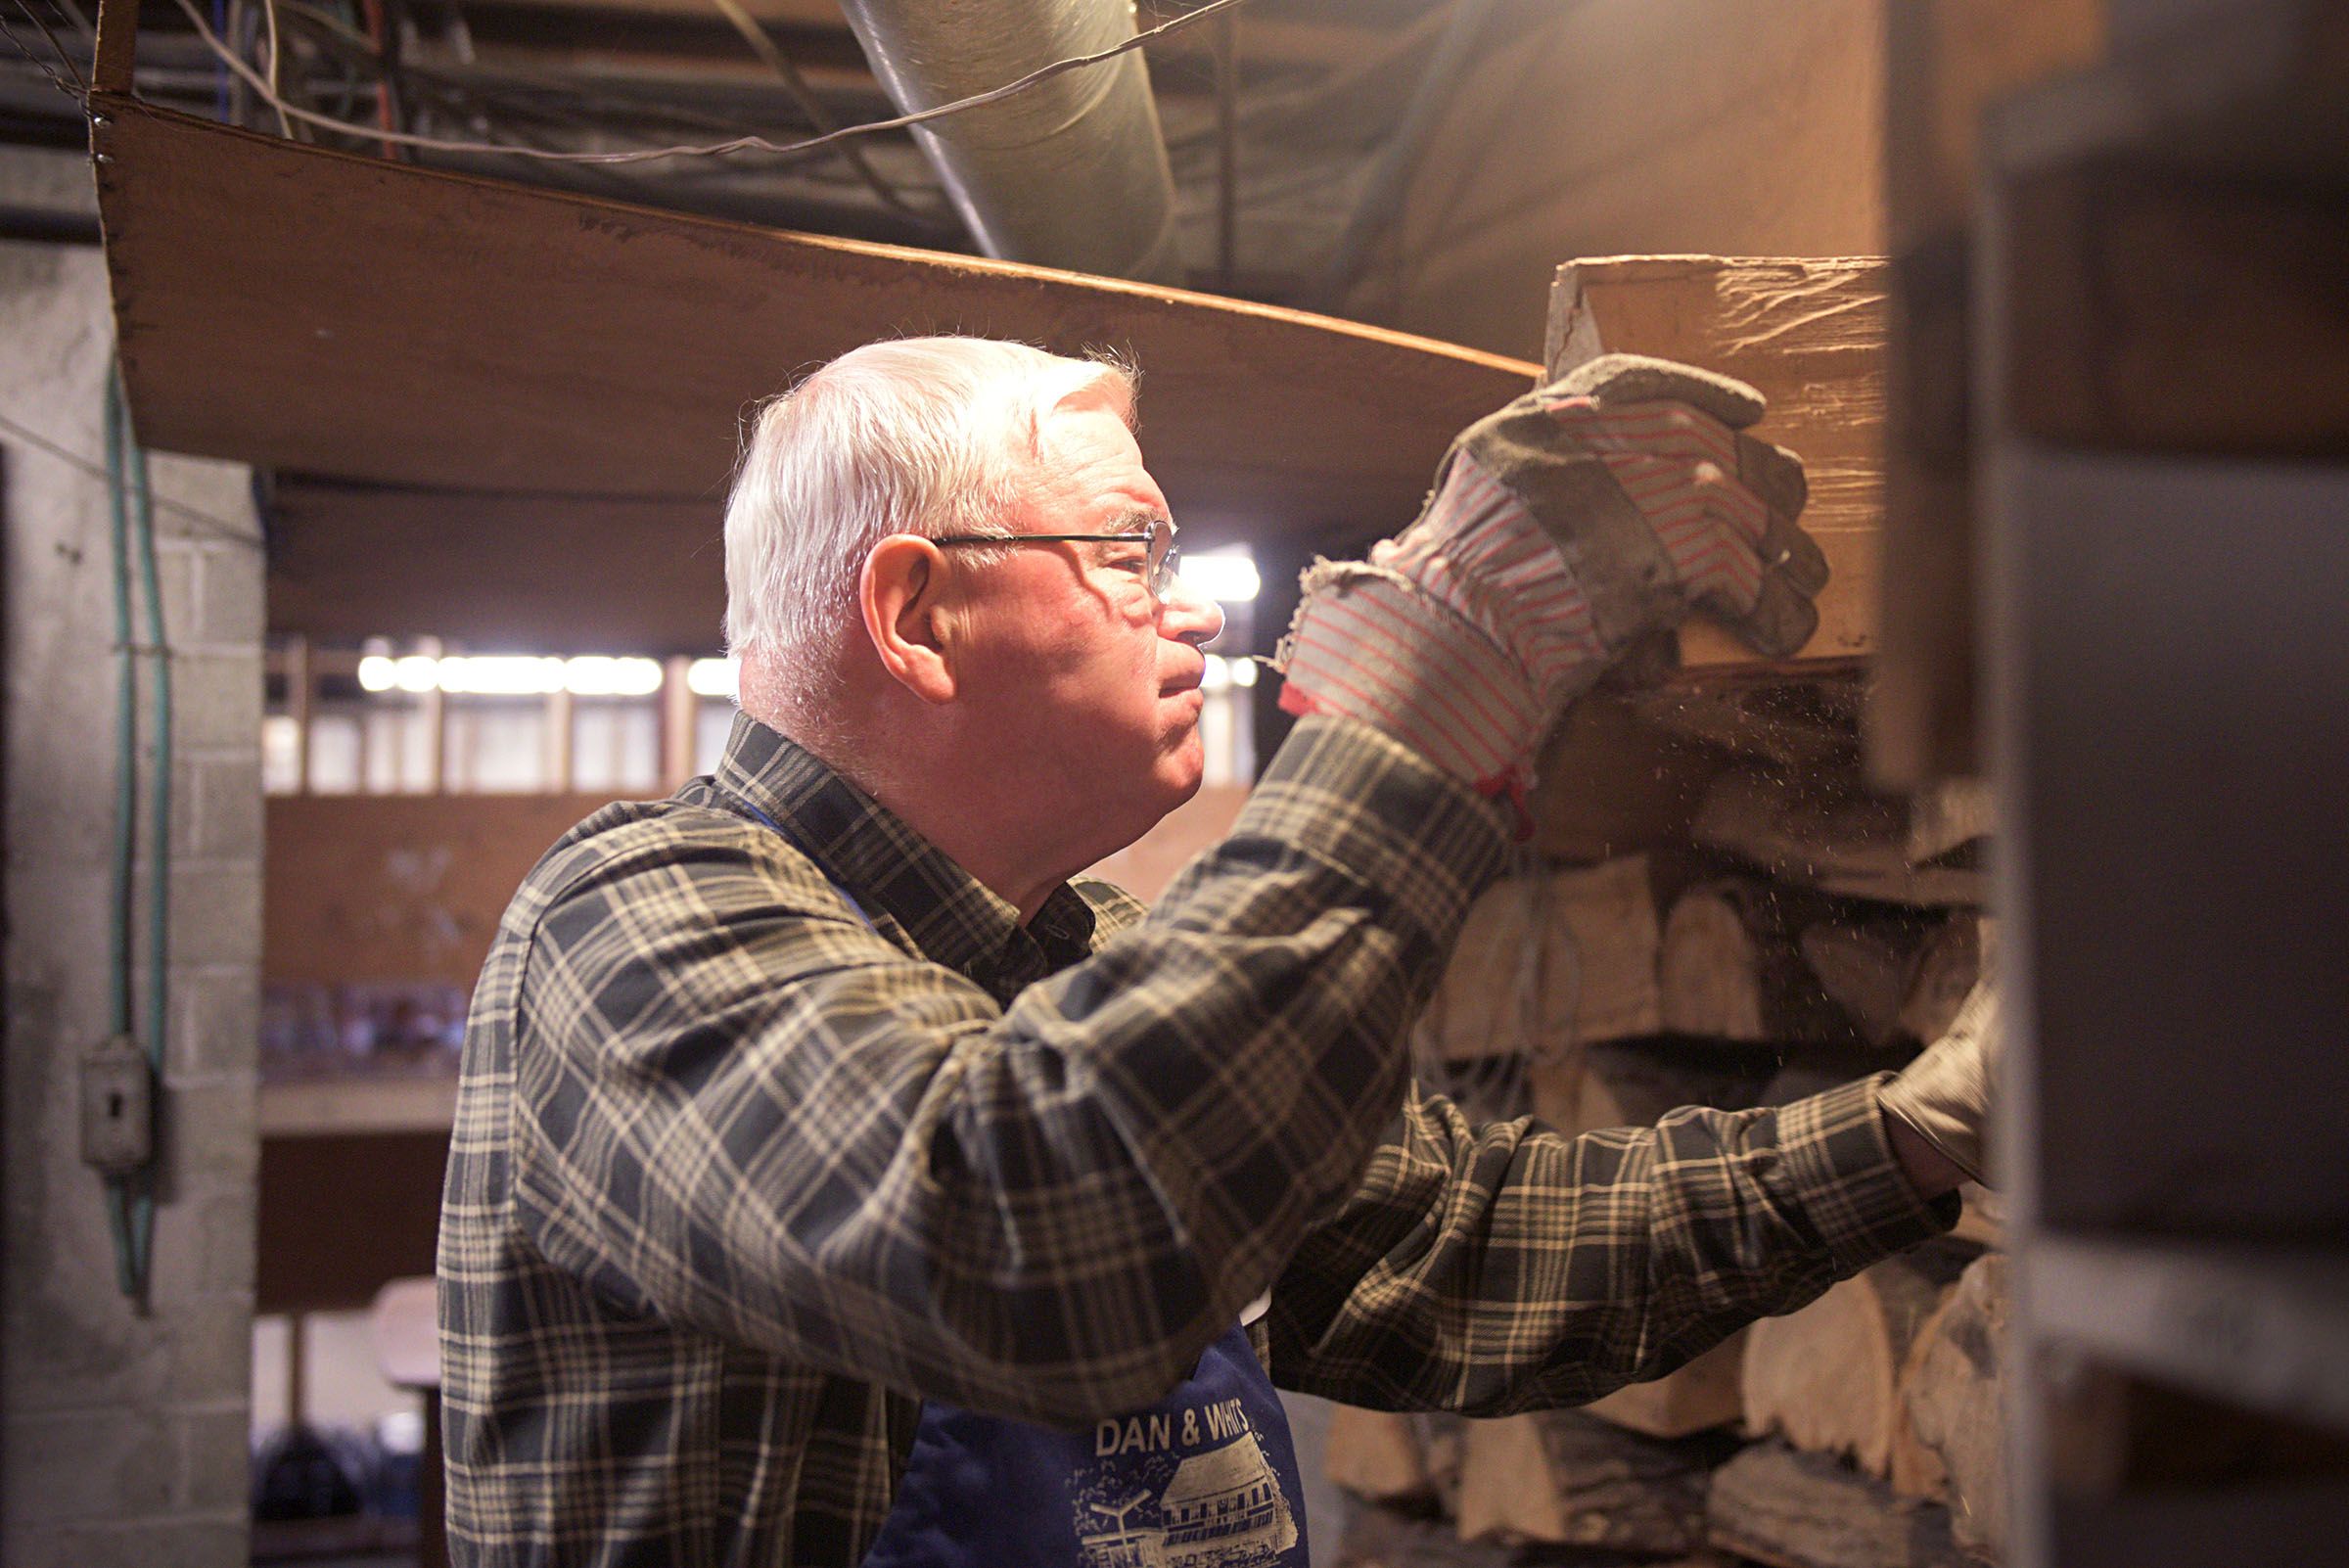 George Fraser, co-owner of Dan & Whit's General Store, grabs fuel for the woodstove in the store's basement in Norwich, Vt., on Jan. 7, 2019. Fraser is the eldest generation of this multigenerational area family business. (Valley News - Joseph Ressler) Copyright Valley News. May not be reprinted or used online without permission. Send requests to permission@vnews.com.